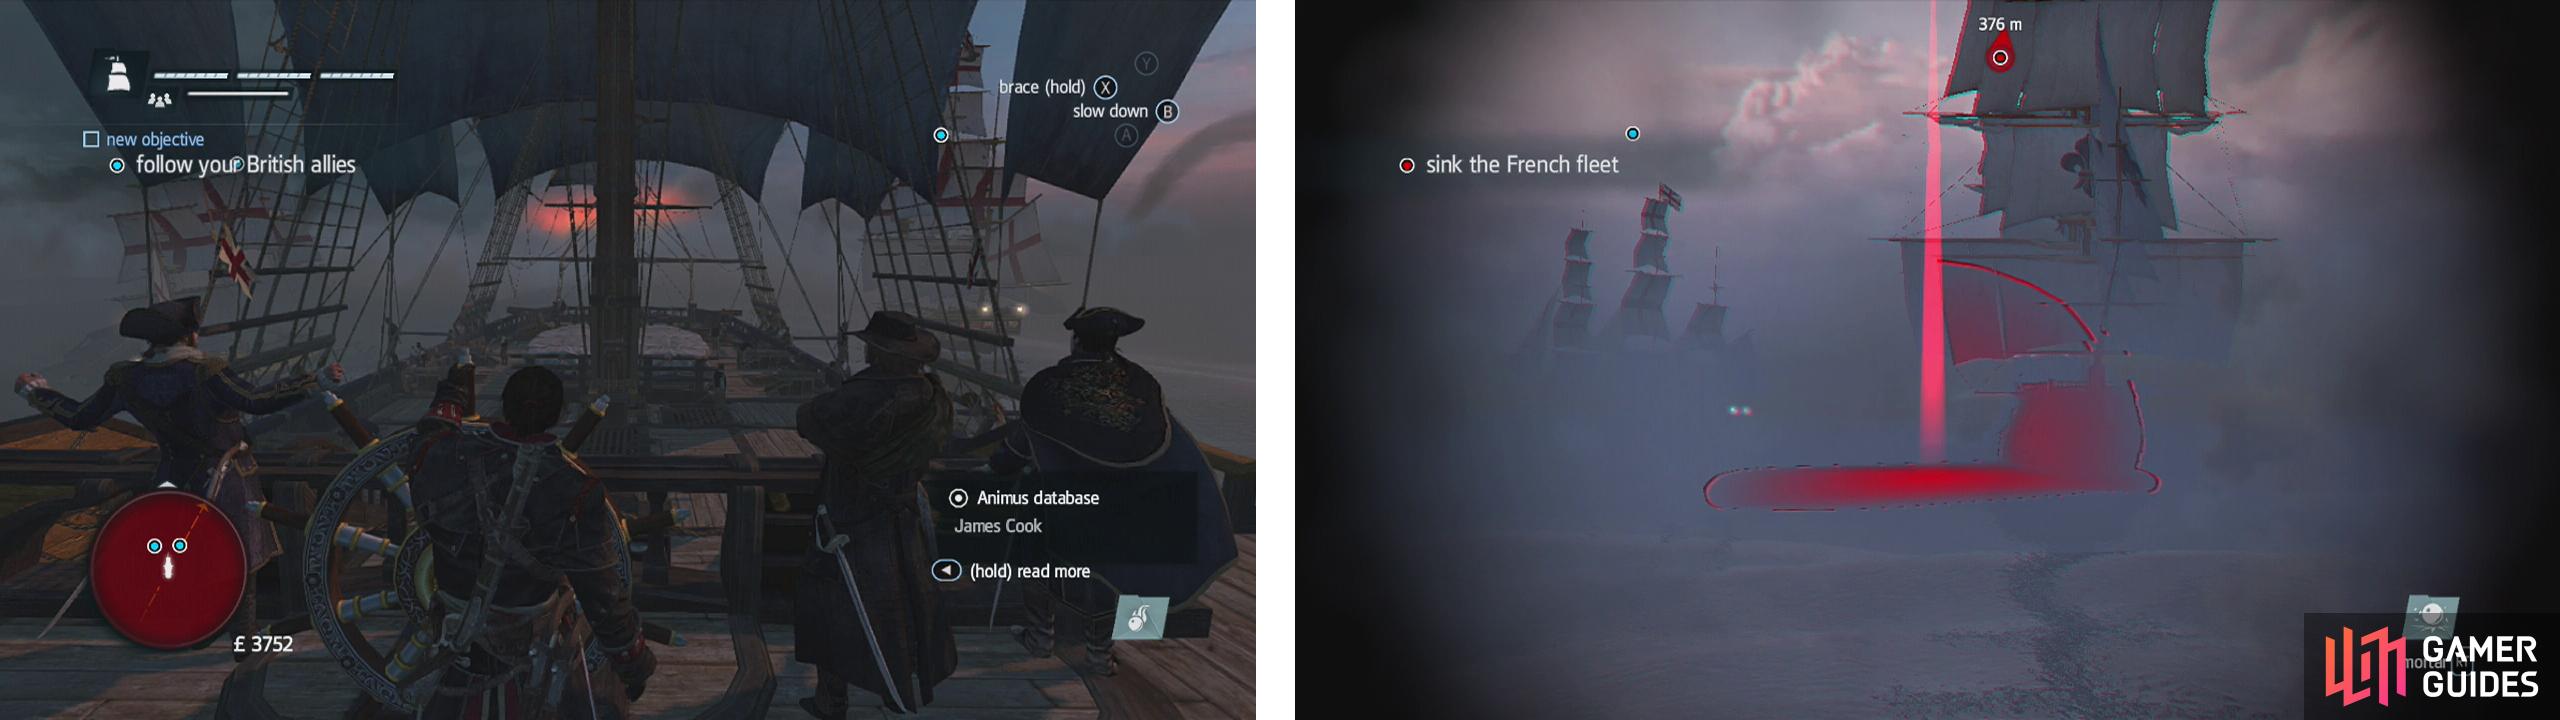 Follow your allies into the smoke (left). Use your mortars from a distance to damage ships as you approach (right).